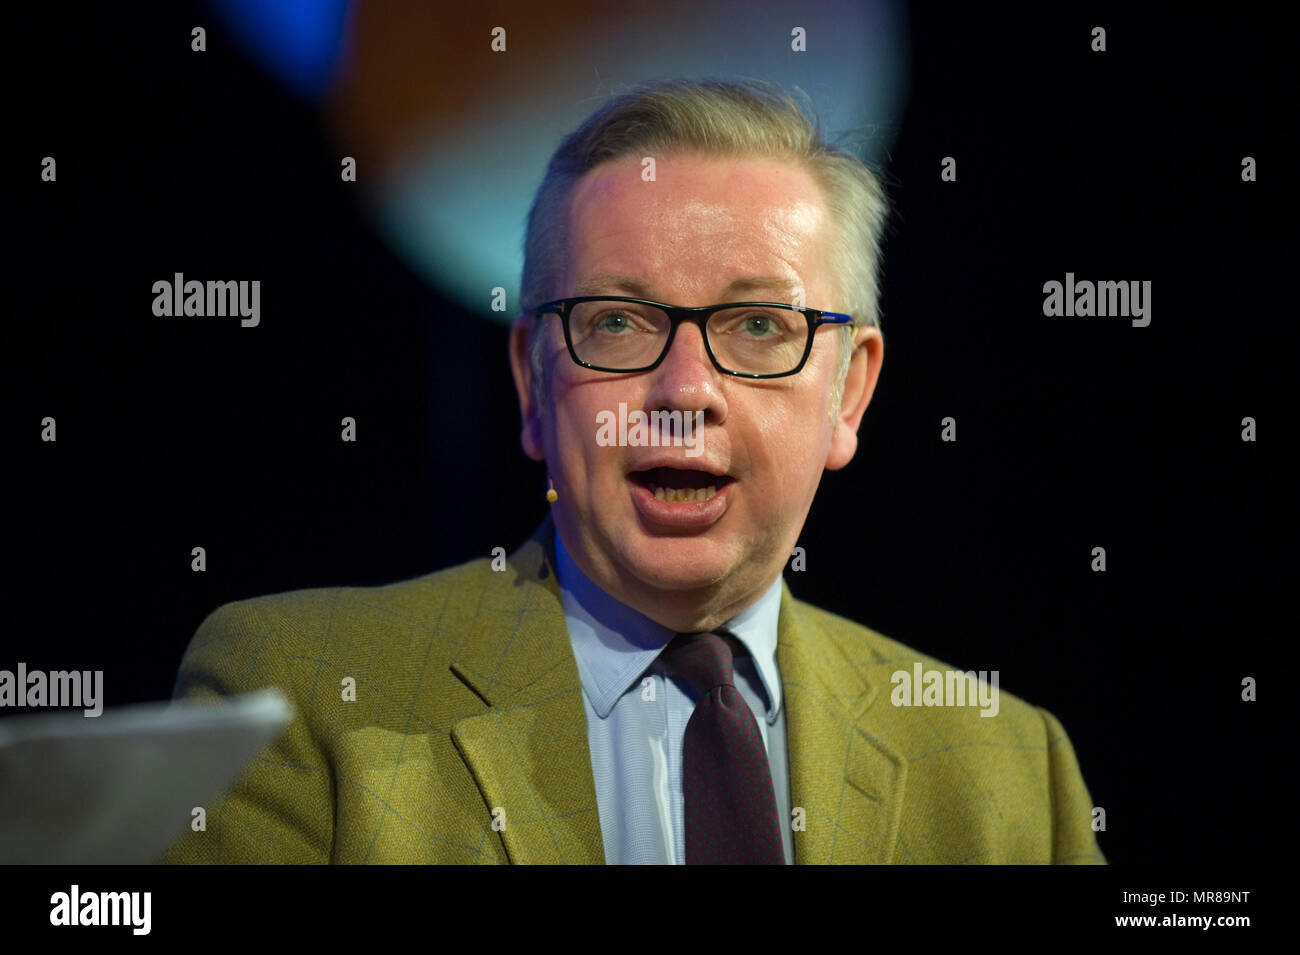 Michael Gove MP, Secretary of State for the Environment, Food and Rural Affairs speaking at Hay Festival 2018, Hay on Wye, Powys, Wales, UK Stock Photo